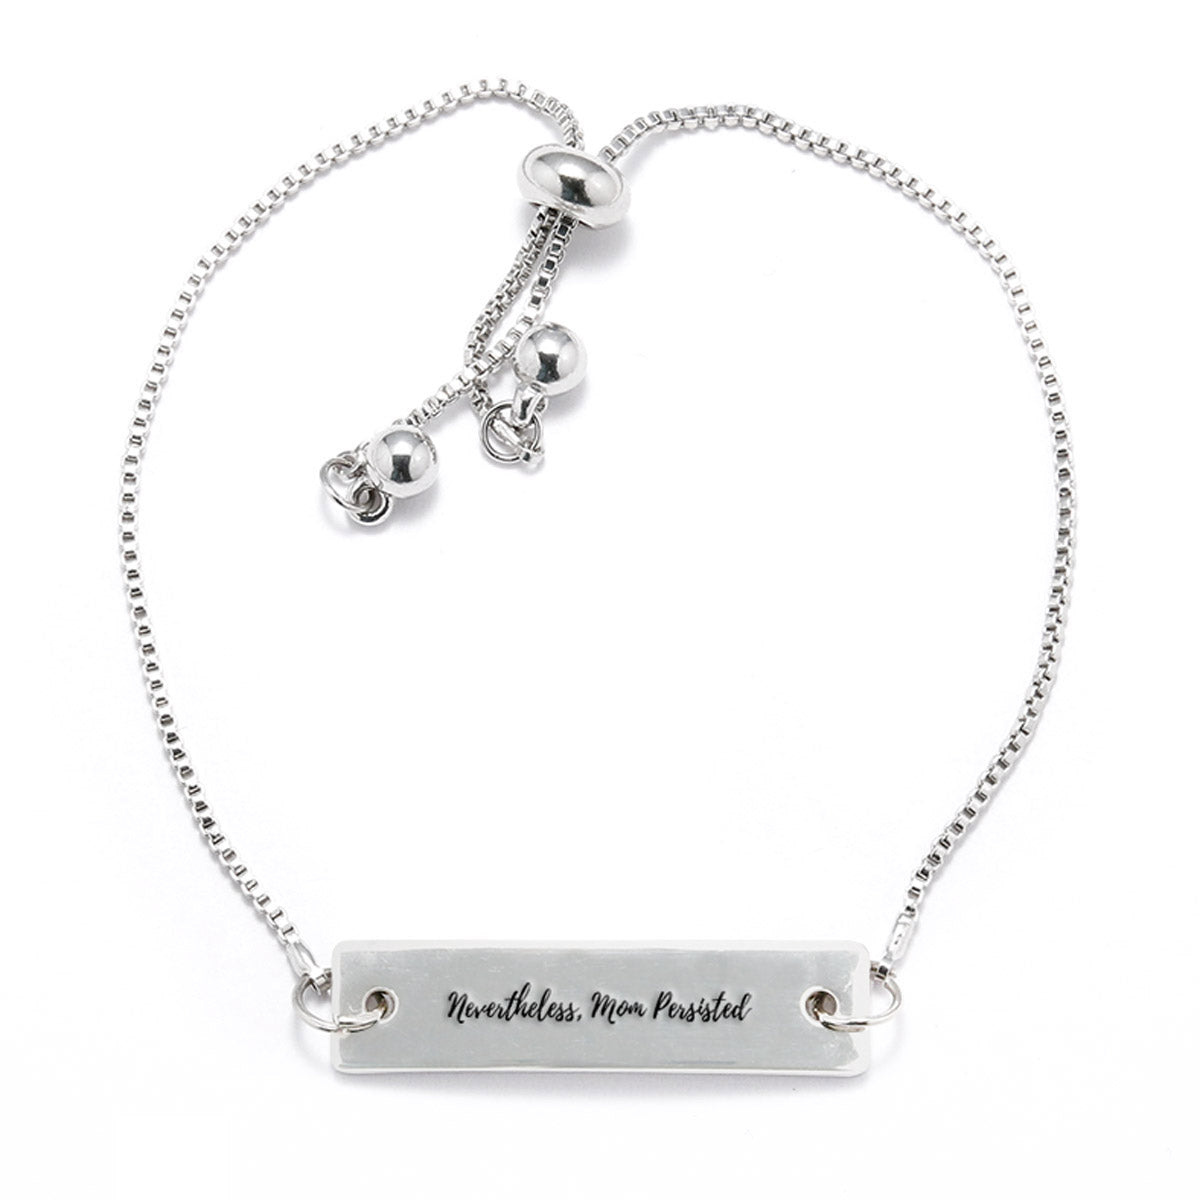 Nevertheless Mom Persisted Silver Bar Adjustable Bracelet - pipercleo.com